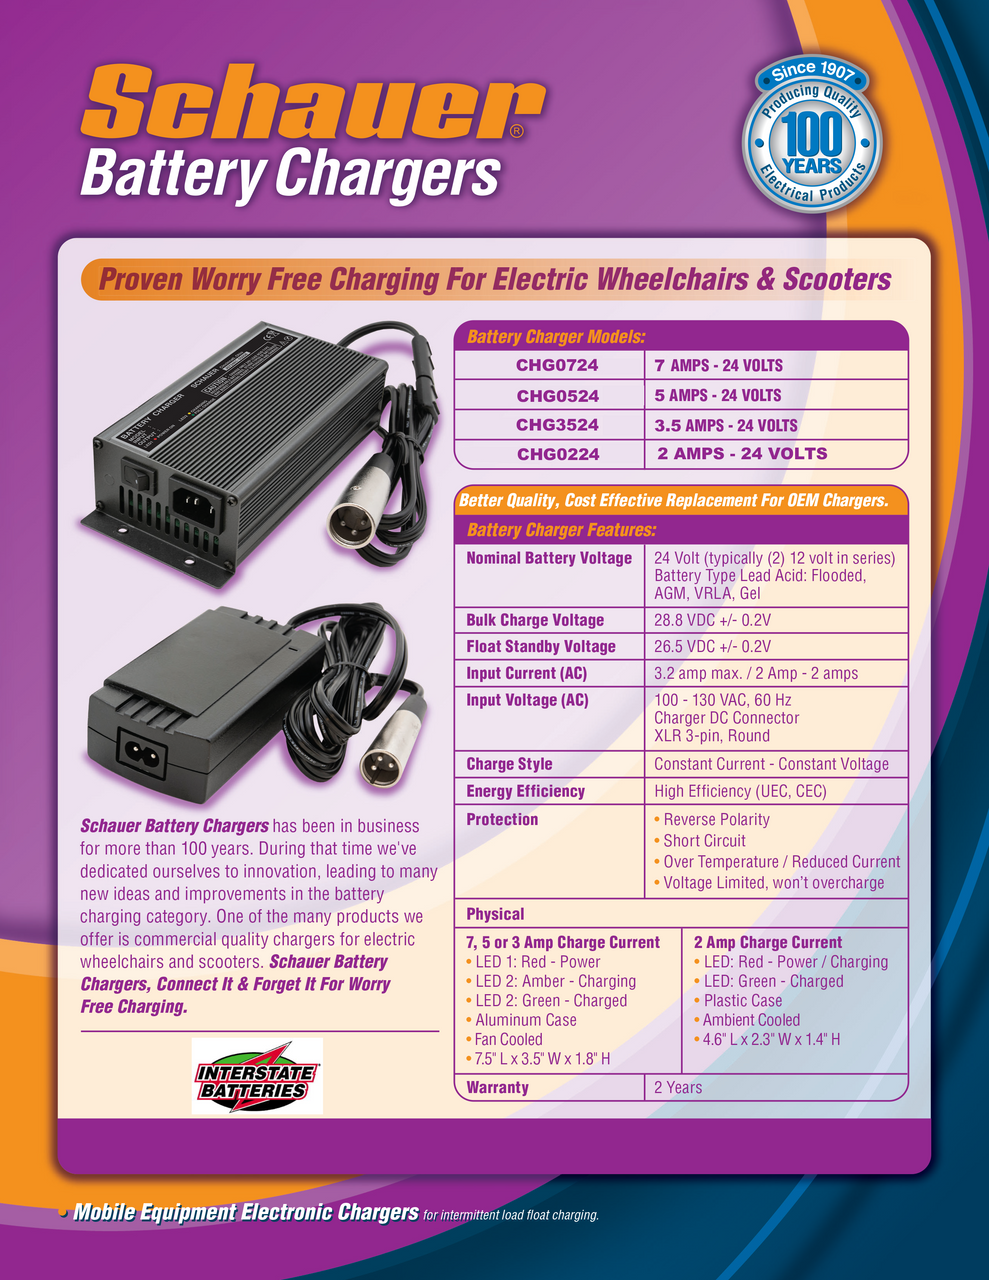 12/24V Battery Charger, 16 - 20A (52985)